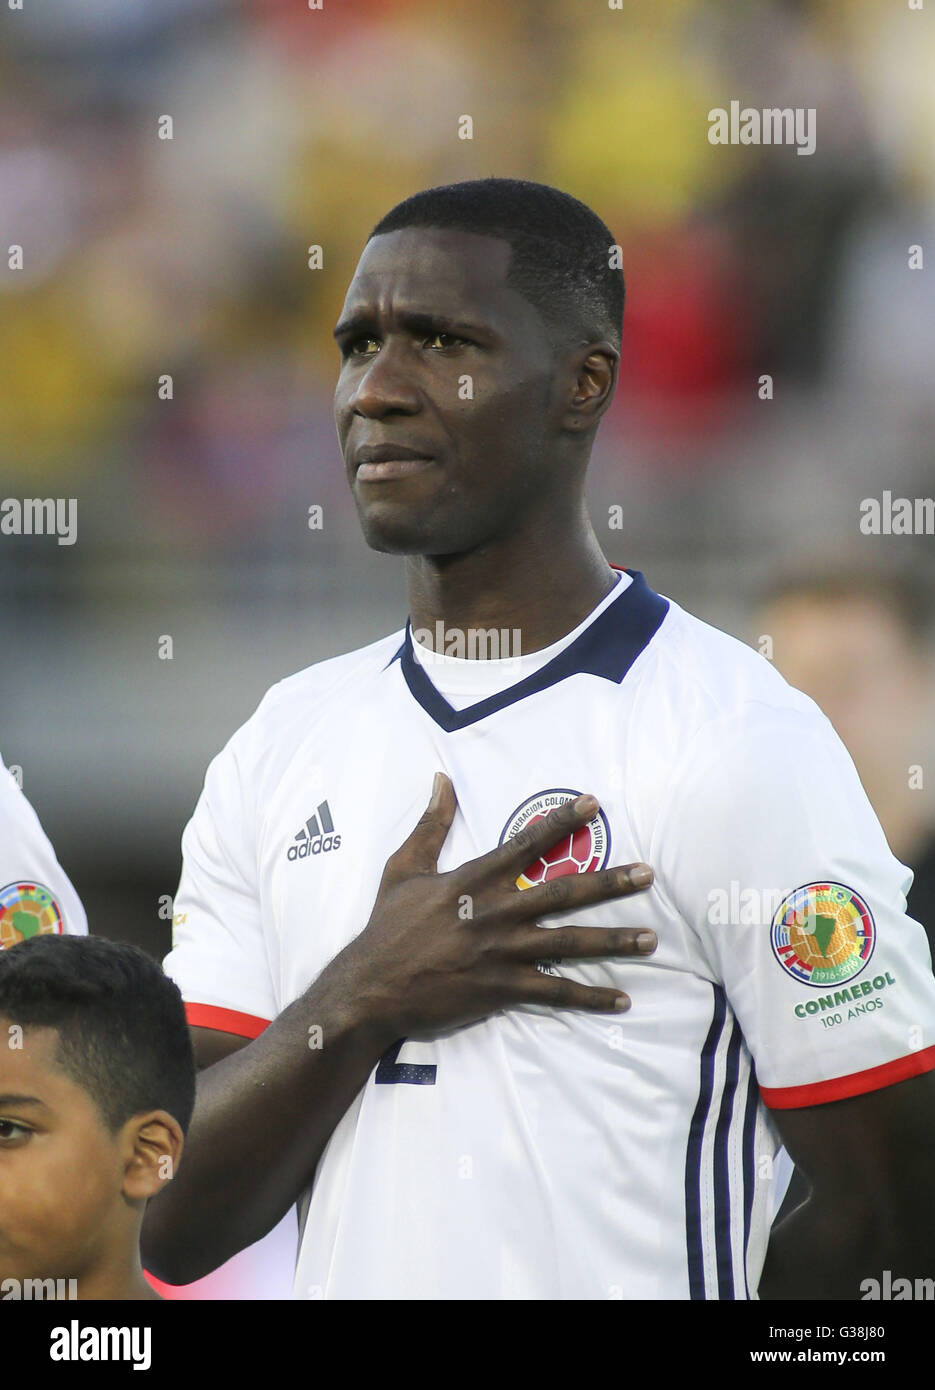 Los Angeles, California, USA. 7th June, 2016. Colombia defender Cristian Zapata in the Copa America soccer match against Paraguay at Rose Bowl in Pasadena, California, June 7, 2016. Colombia won 2-1. © Ringo Chiu/ZUMA Wire/Alamy Live News Stock Photo